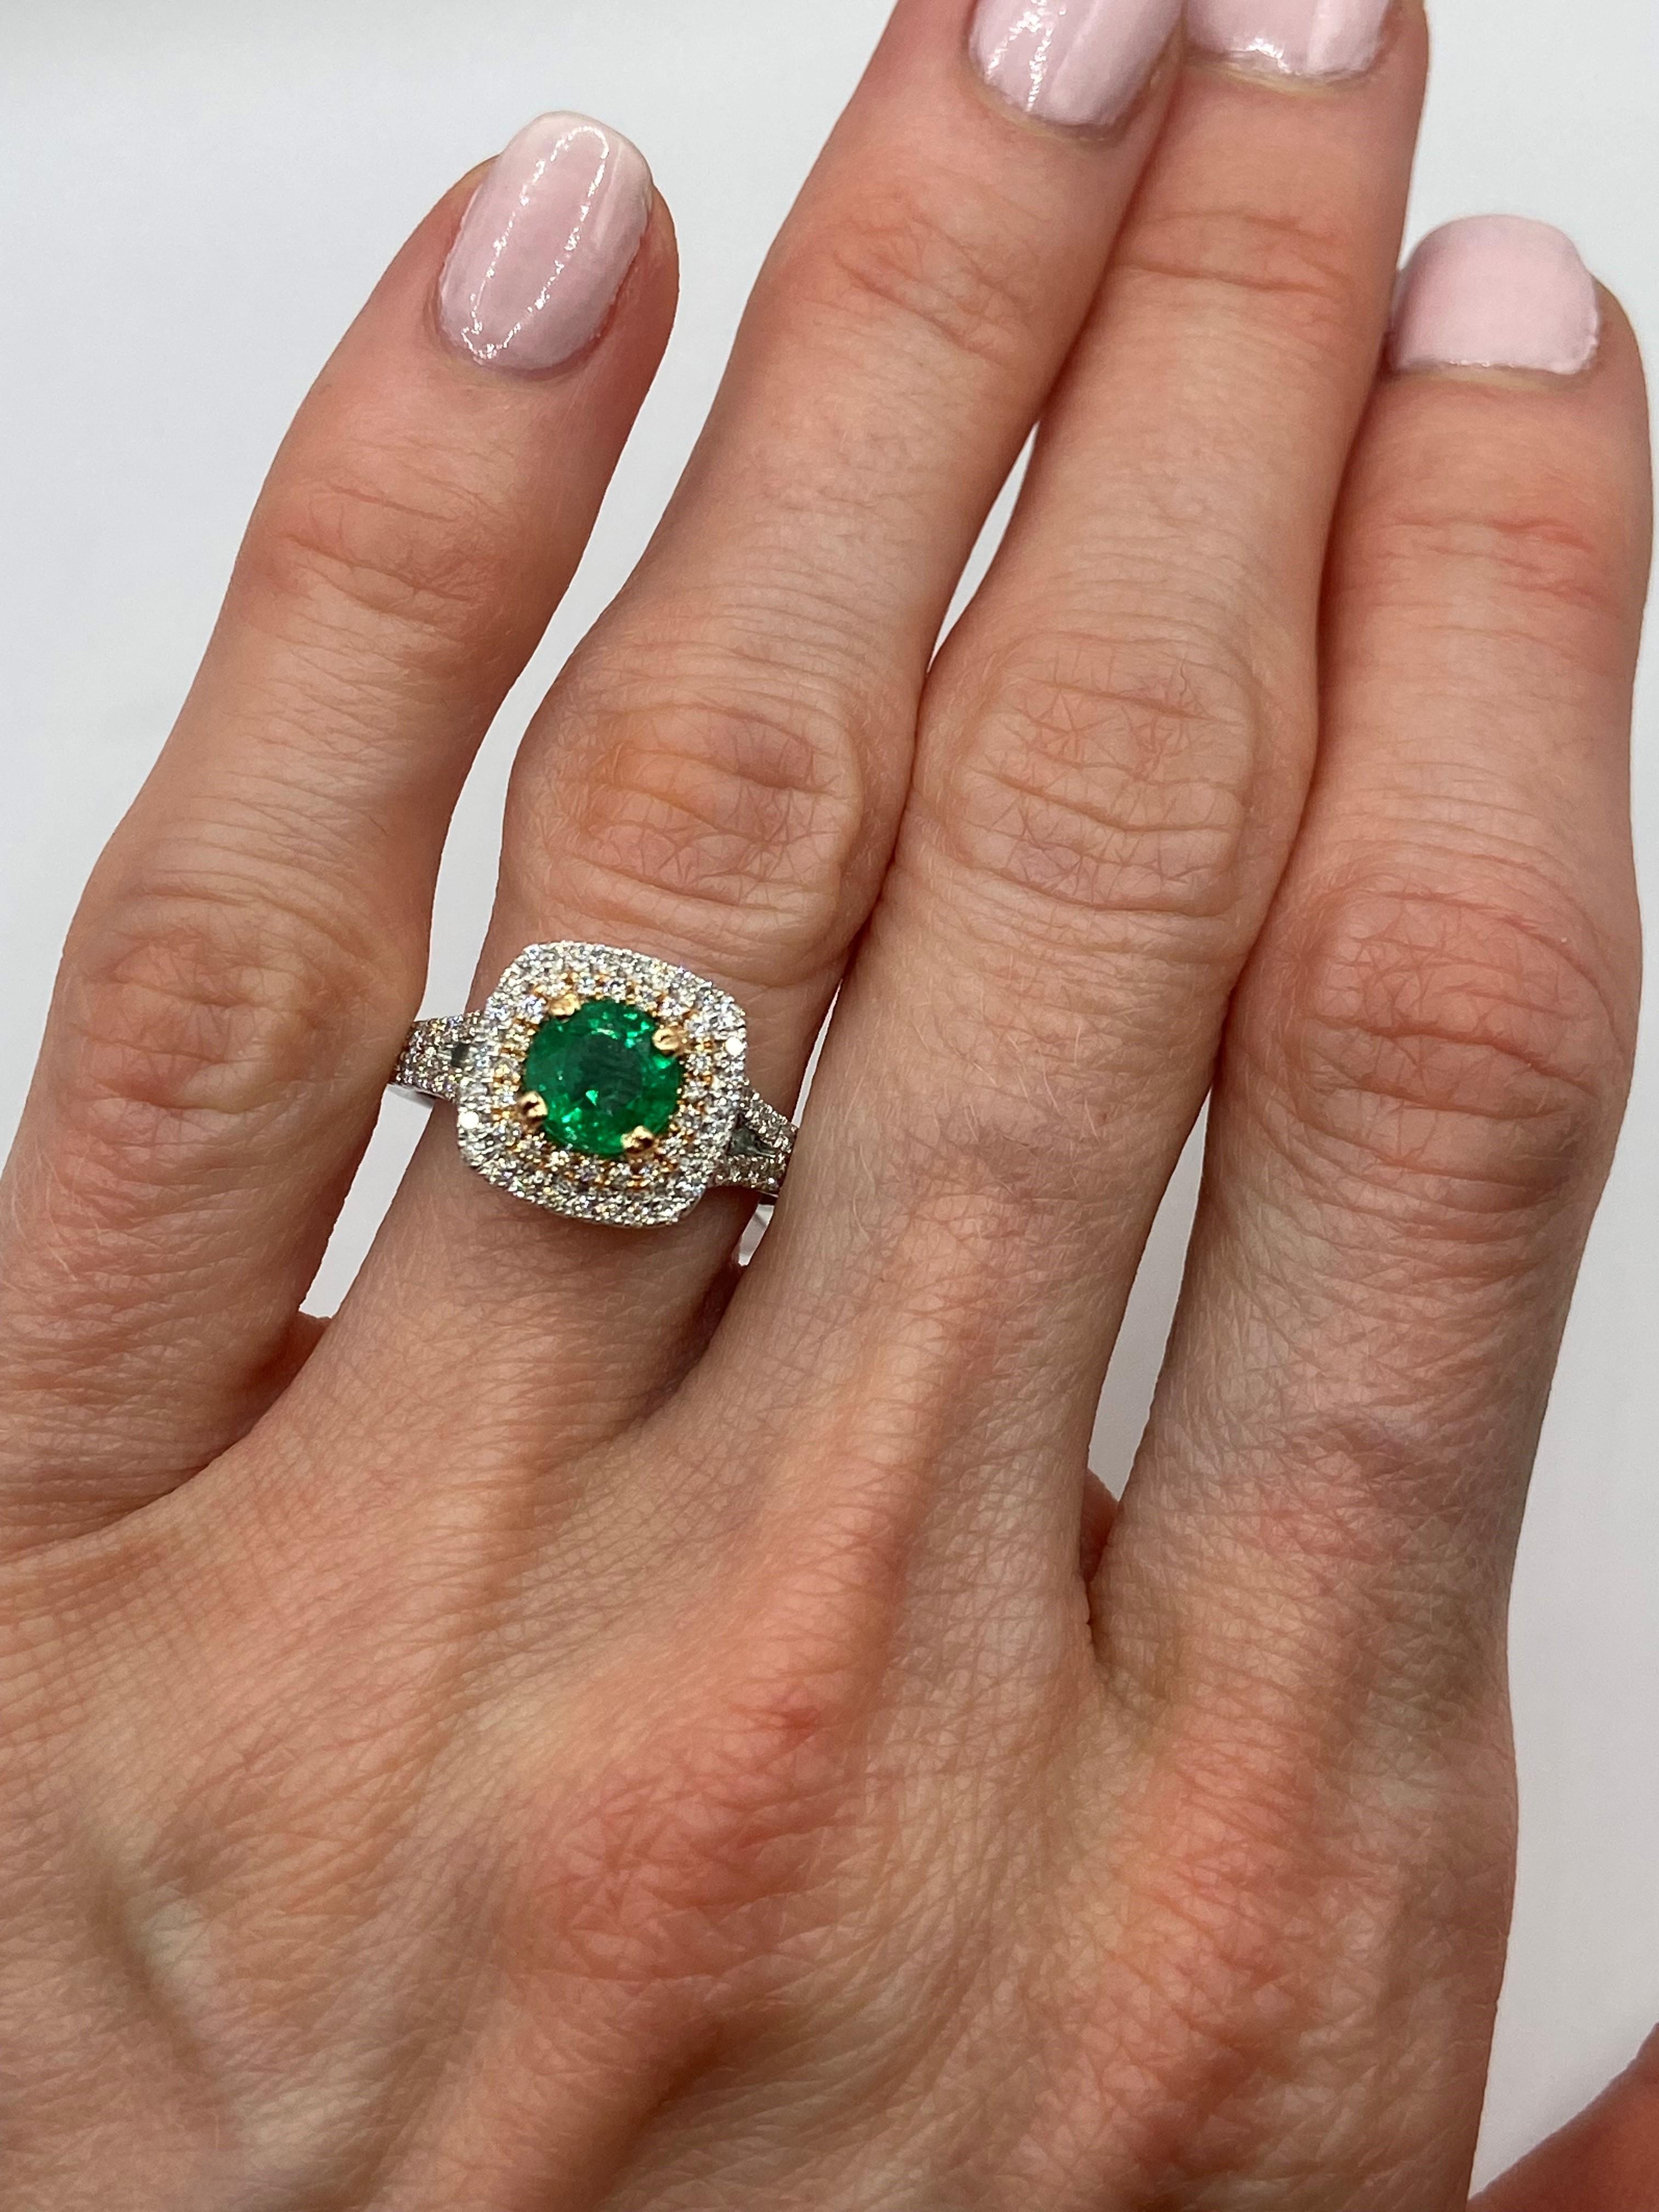 18KT White & Rose Gold
Size: 6.5

Number of Green Emeralds: 1
Carat Weight: 0.90ctw
Stone Size: 6mm
Color: Bright Green

Round Diamonds: 0.62ctw

This beautiful ring showcases a bright green emerald center stone. The stone weights 0.90 carats and is